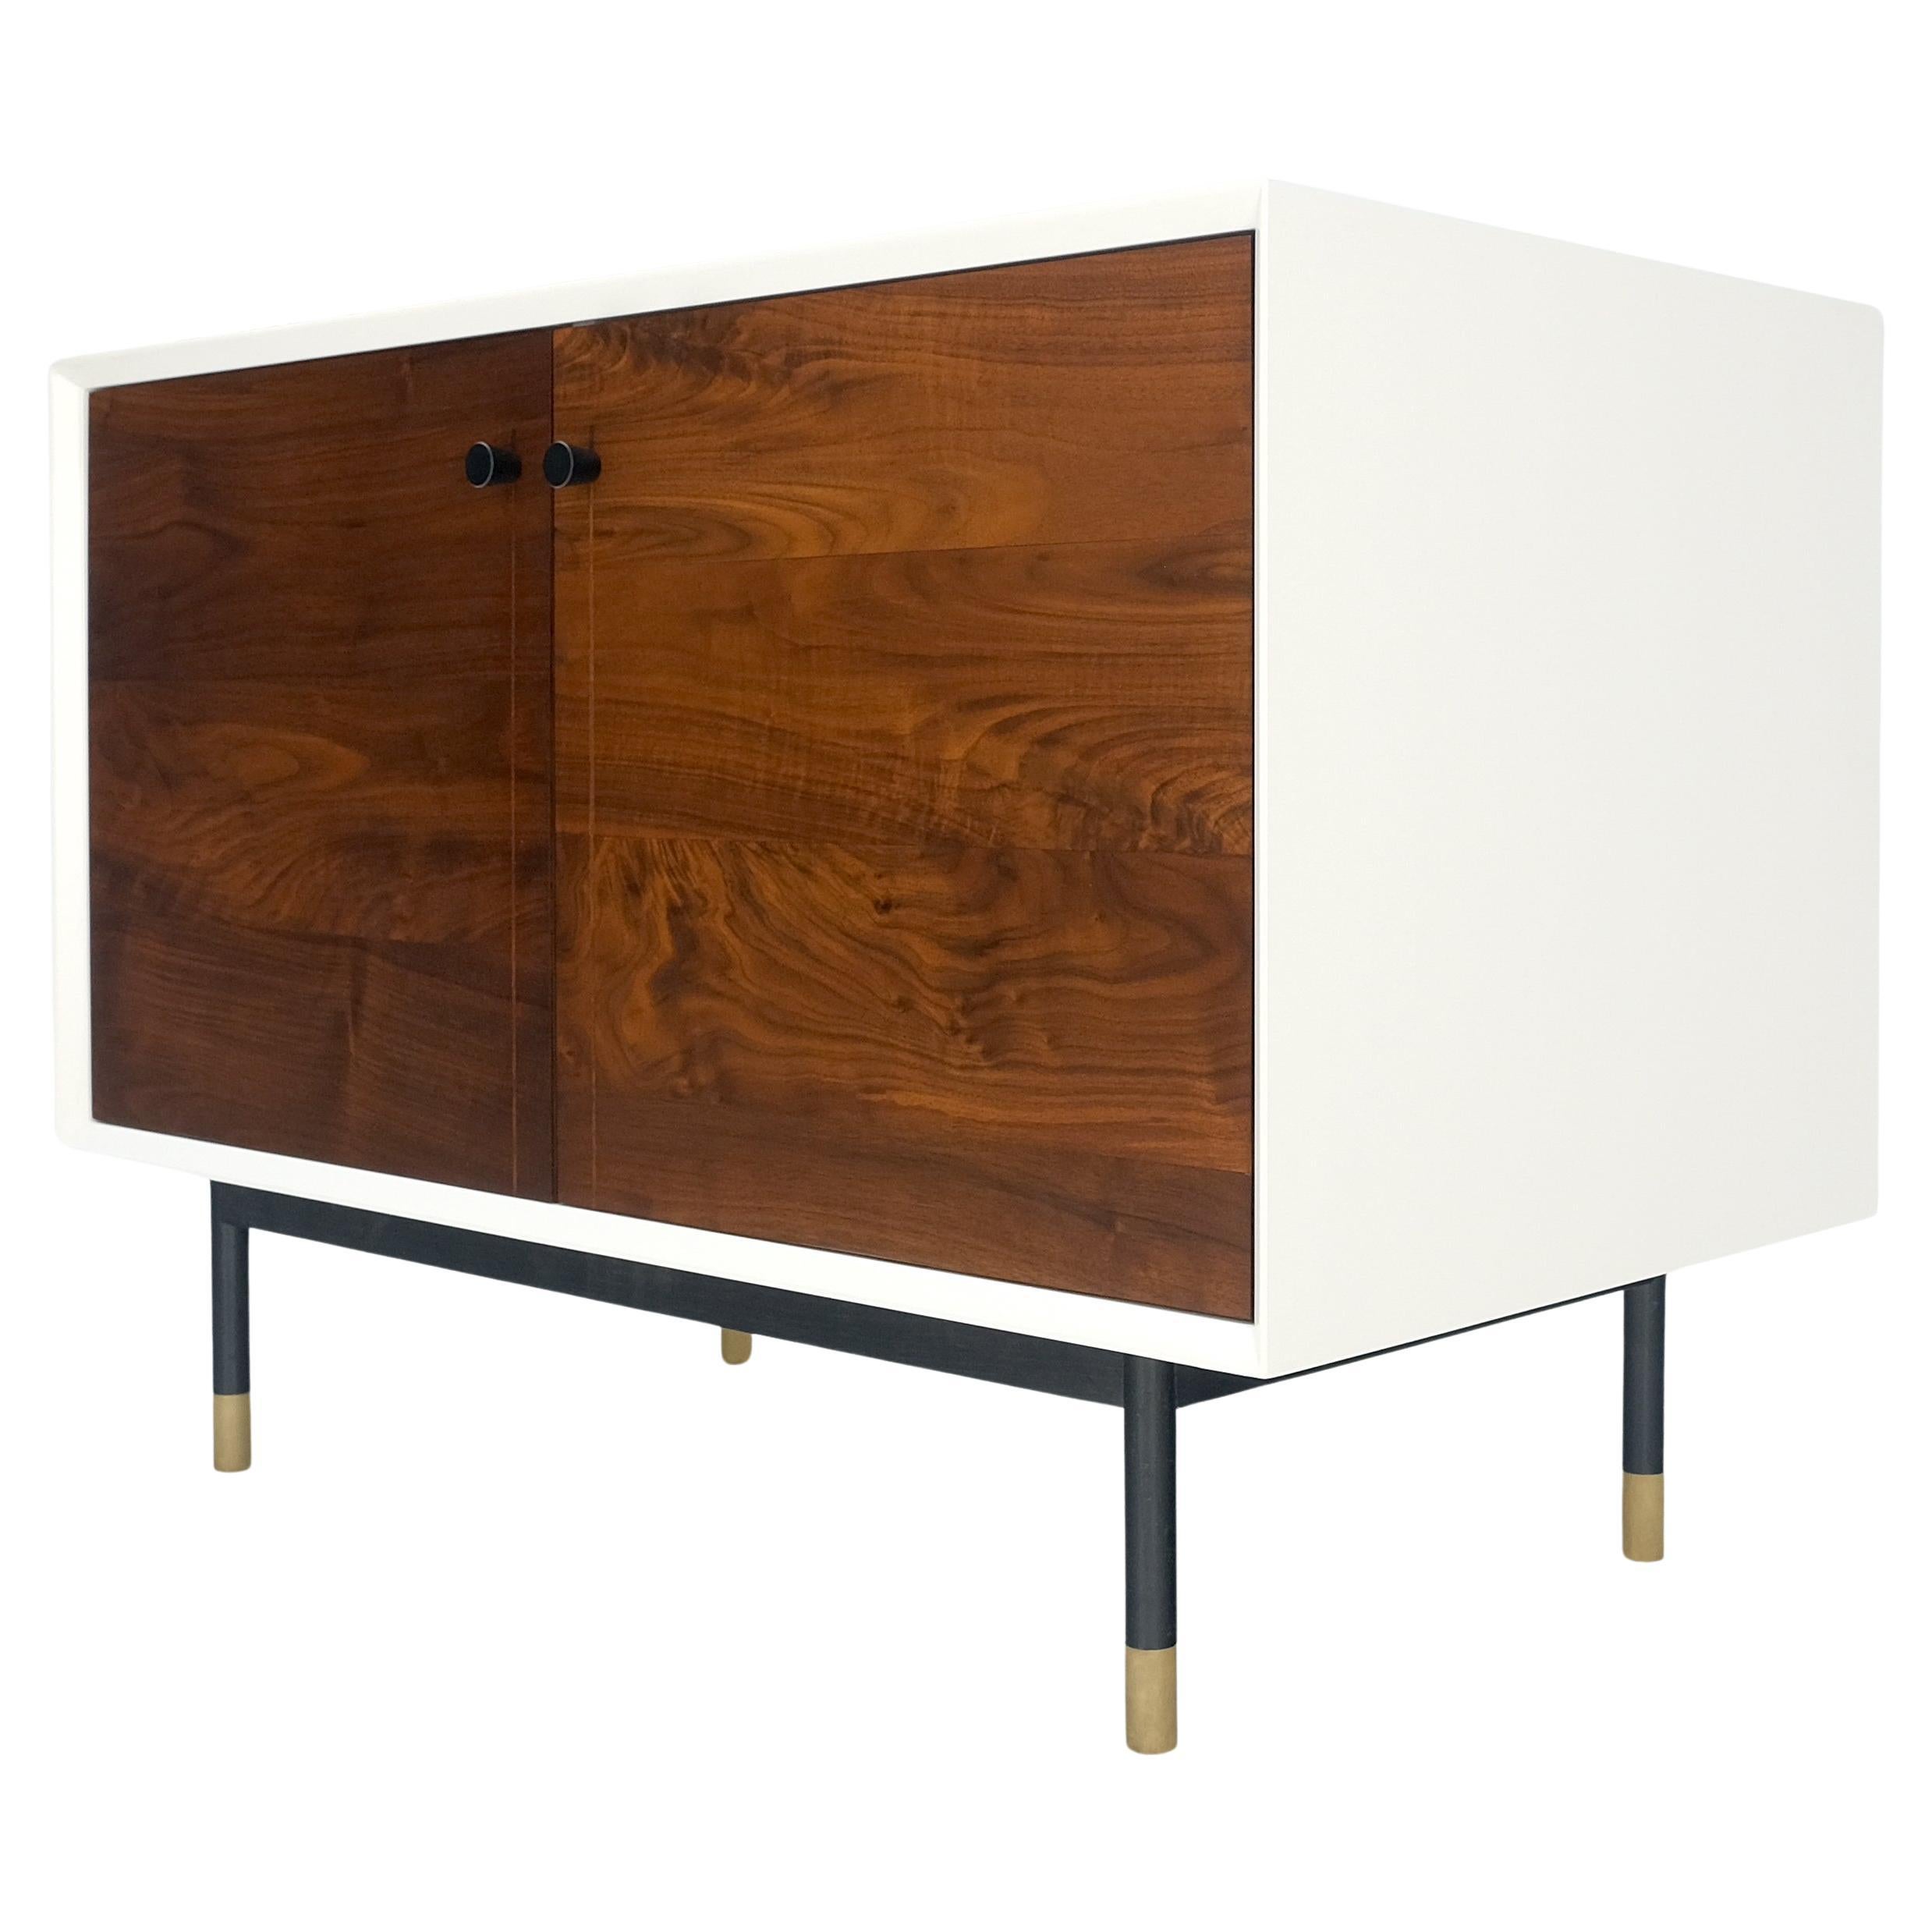 White Lacquer Oiled Walnut Double Door Cylinder Legs Brass Tips Legs Credenza For Sale